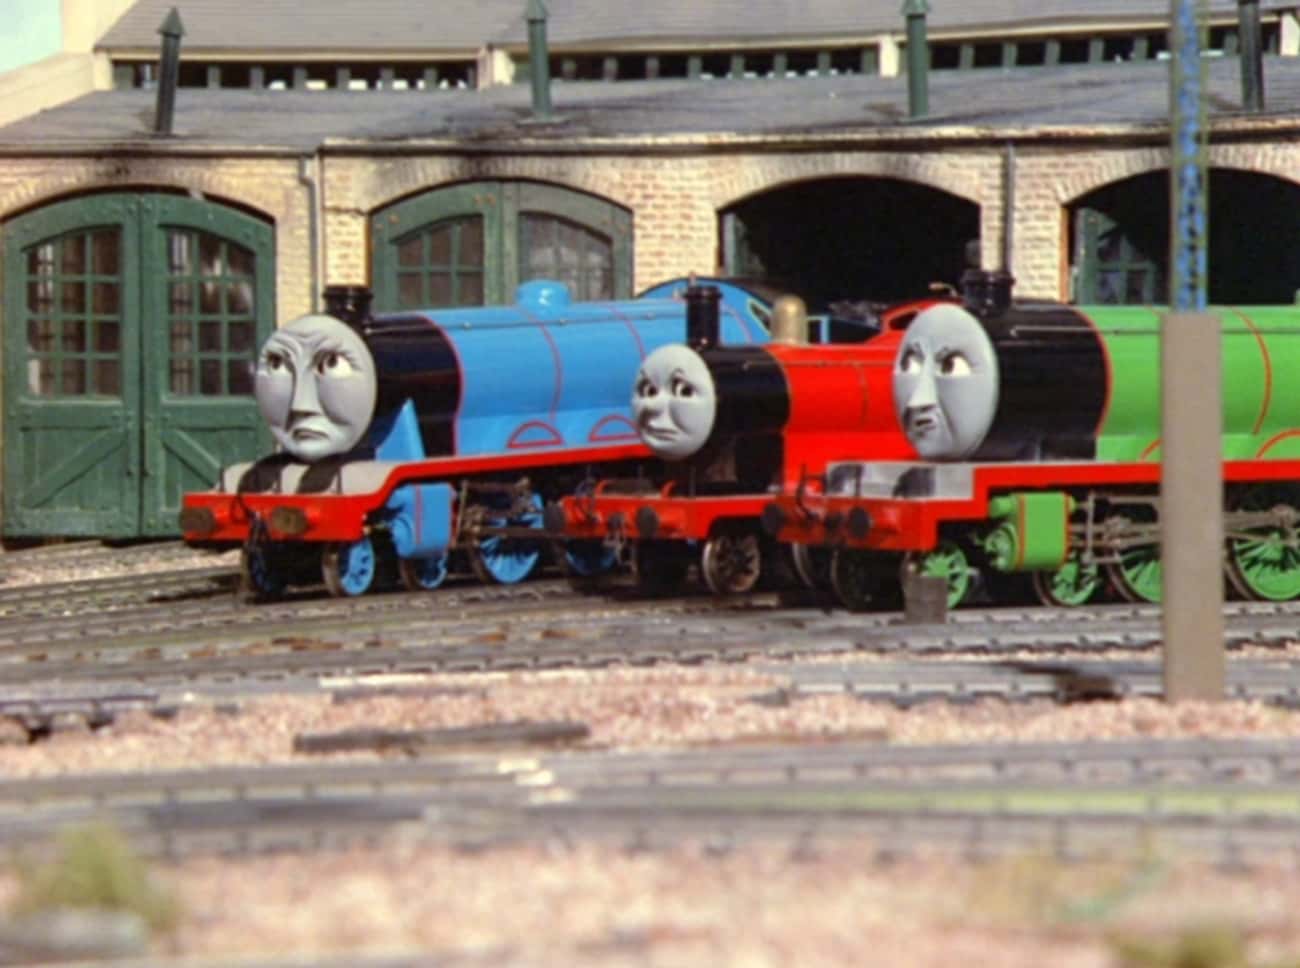 The Engines Are Unable To Fight Sodor's System